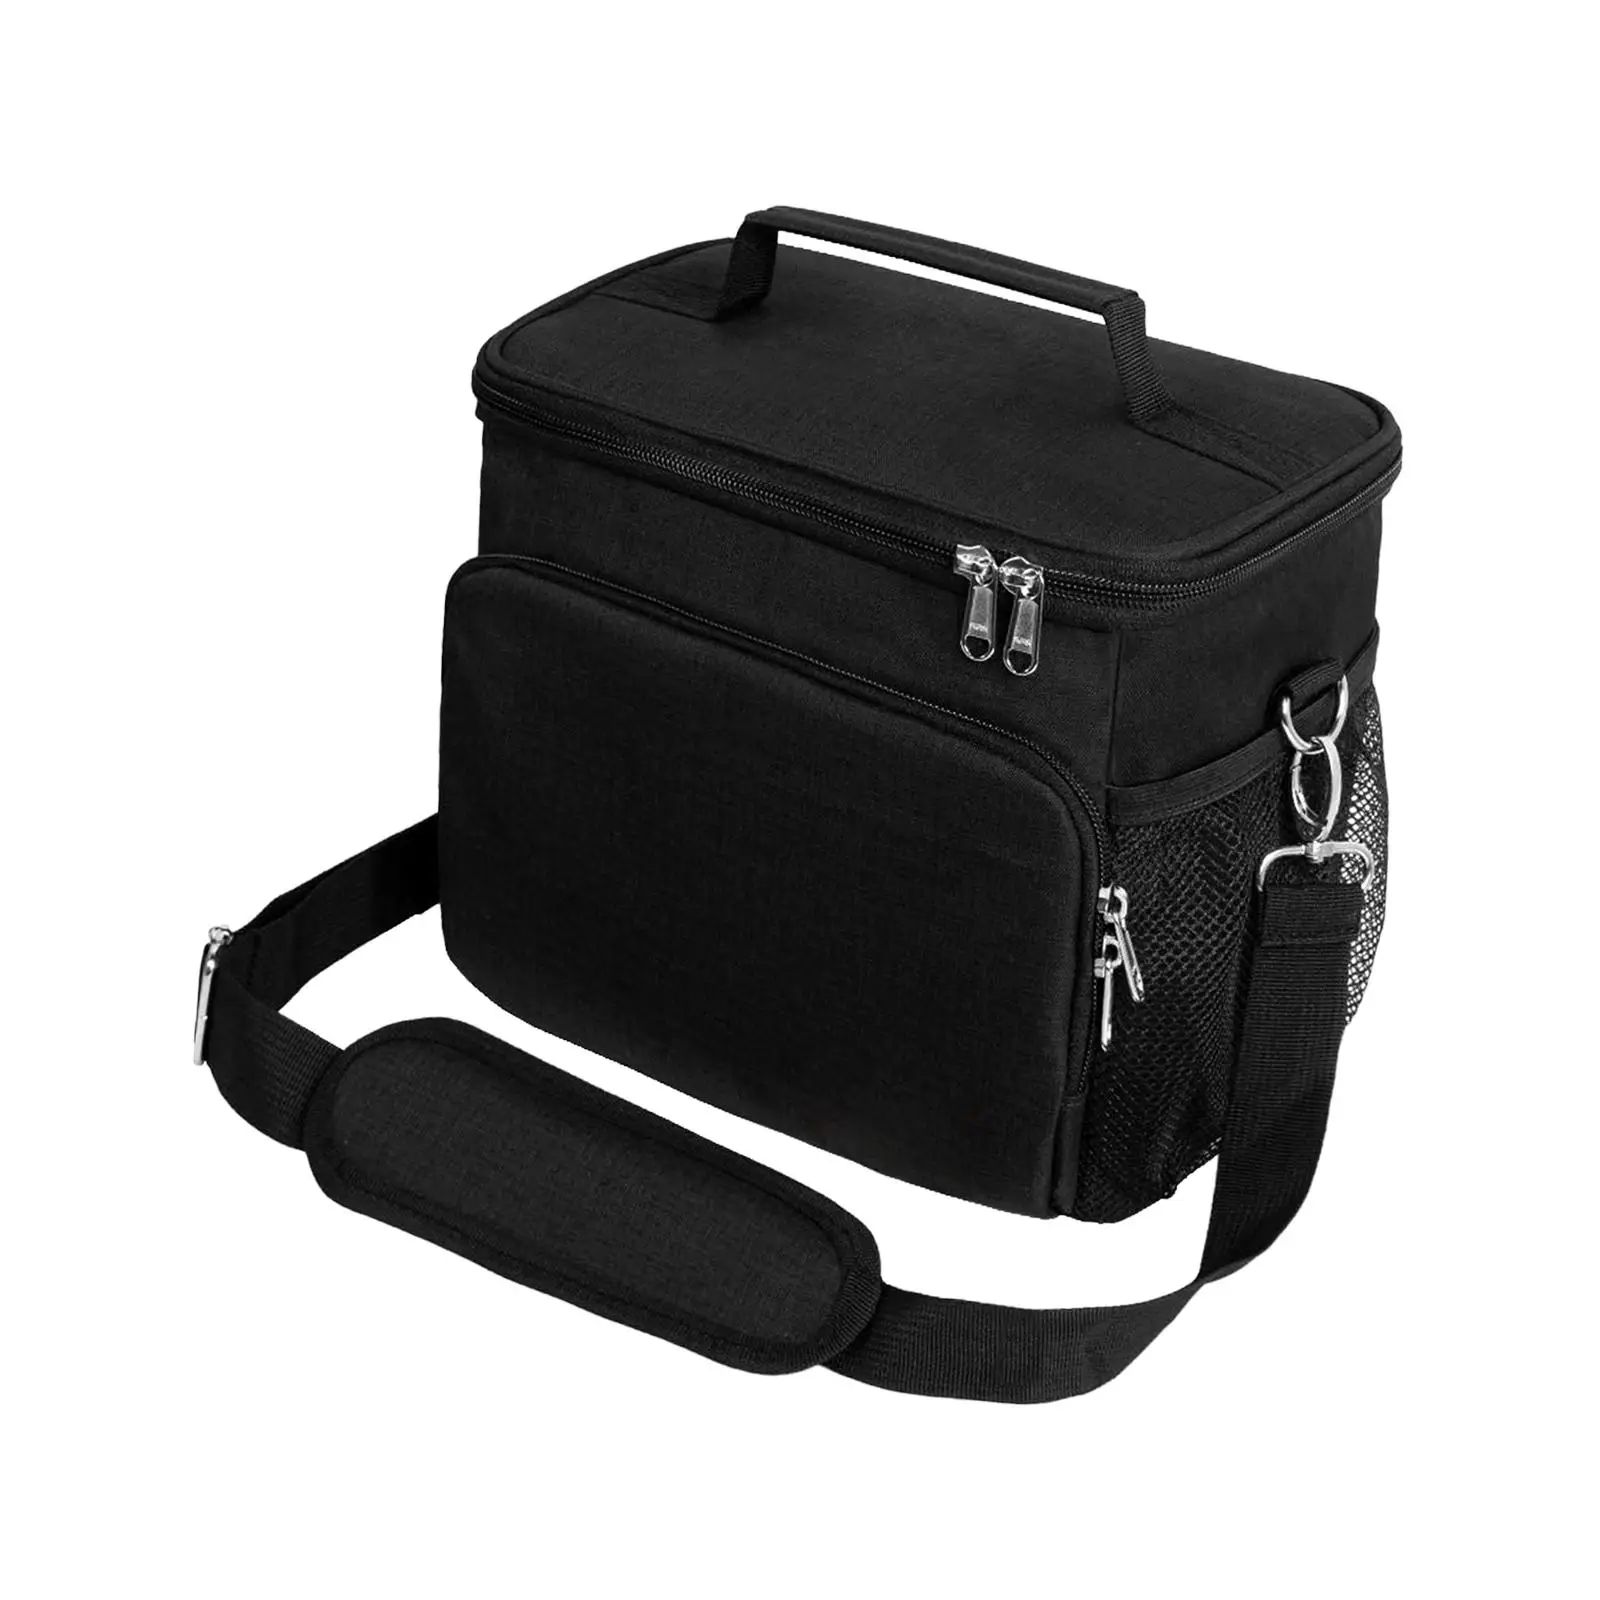 Lunch Bag with Adjustable Shoulder Strap Portable for Fishing Camping Travel